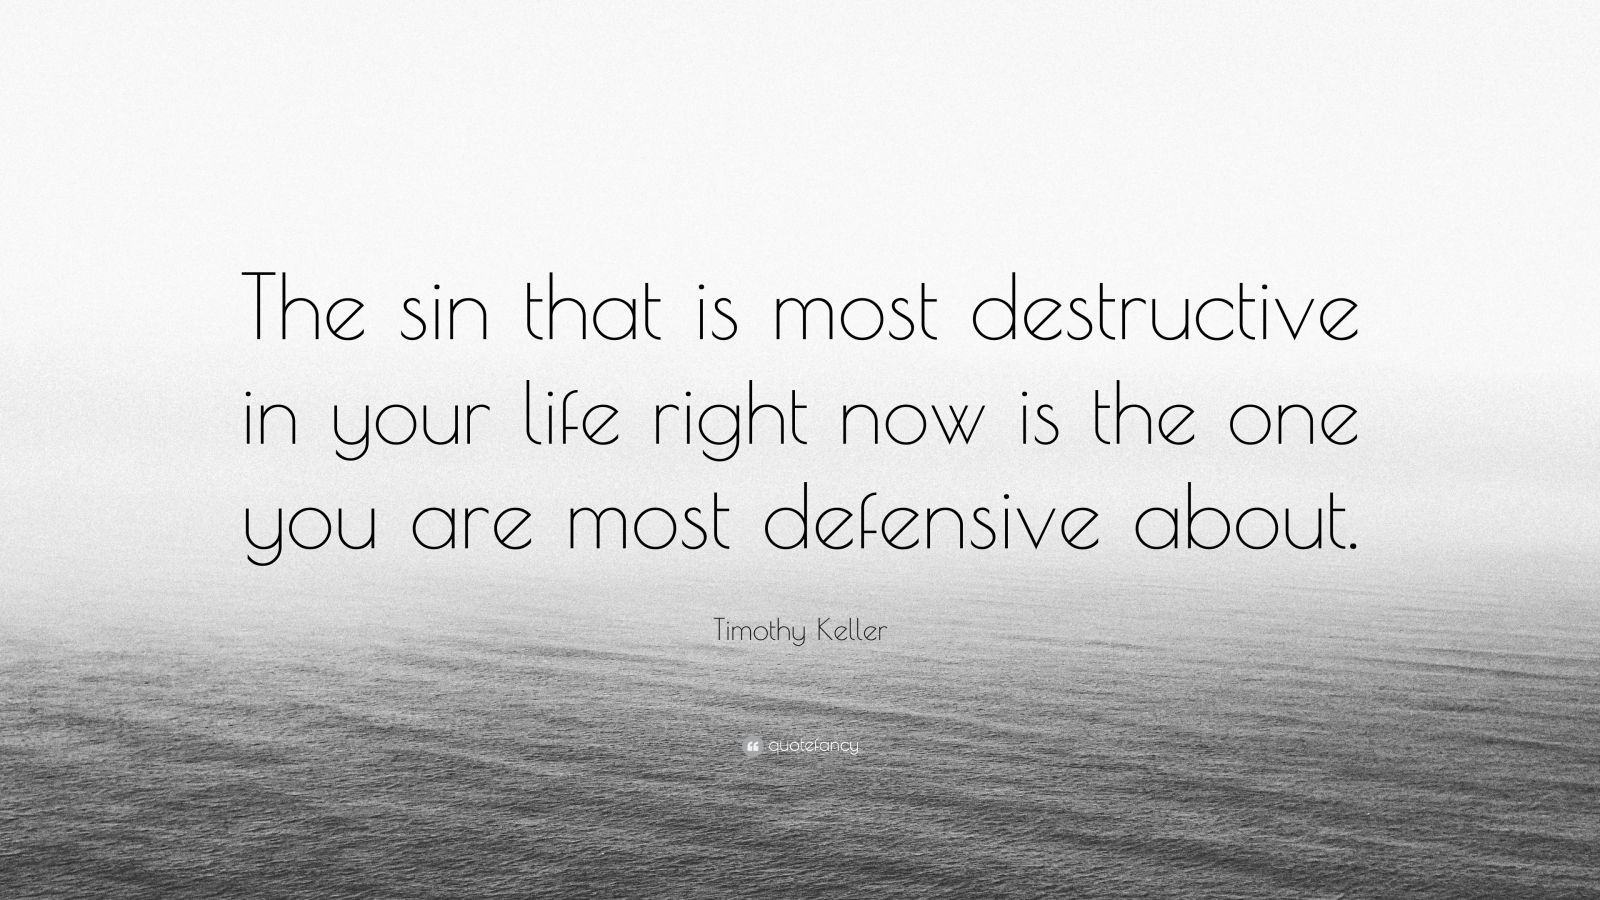 Tim Keller Marriage Quotes
 Timothy Keller Quote “The sin that is most destructive in